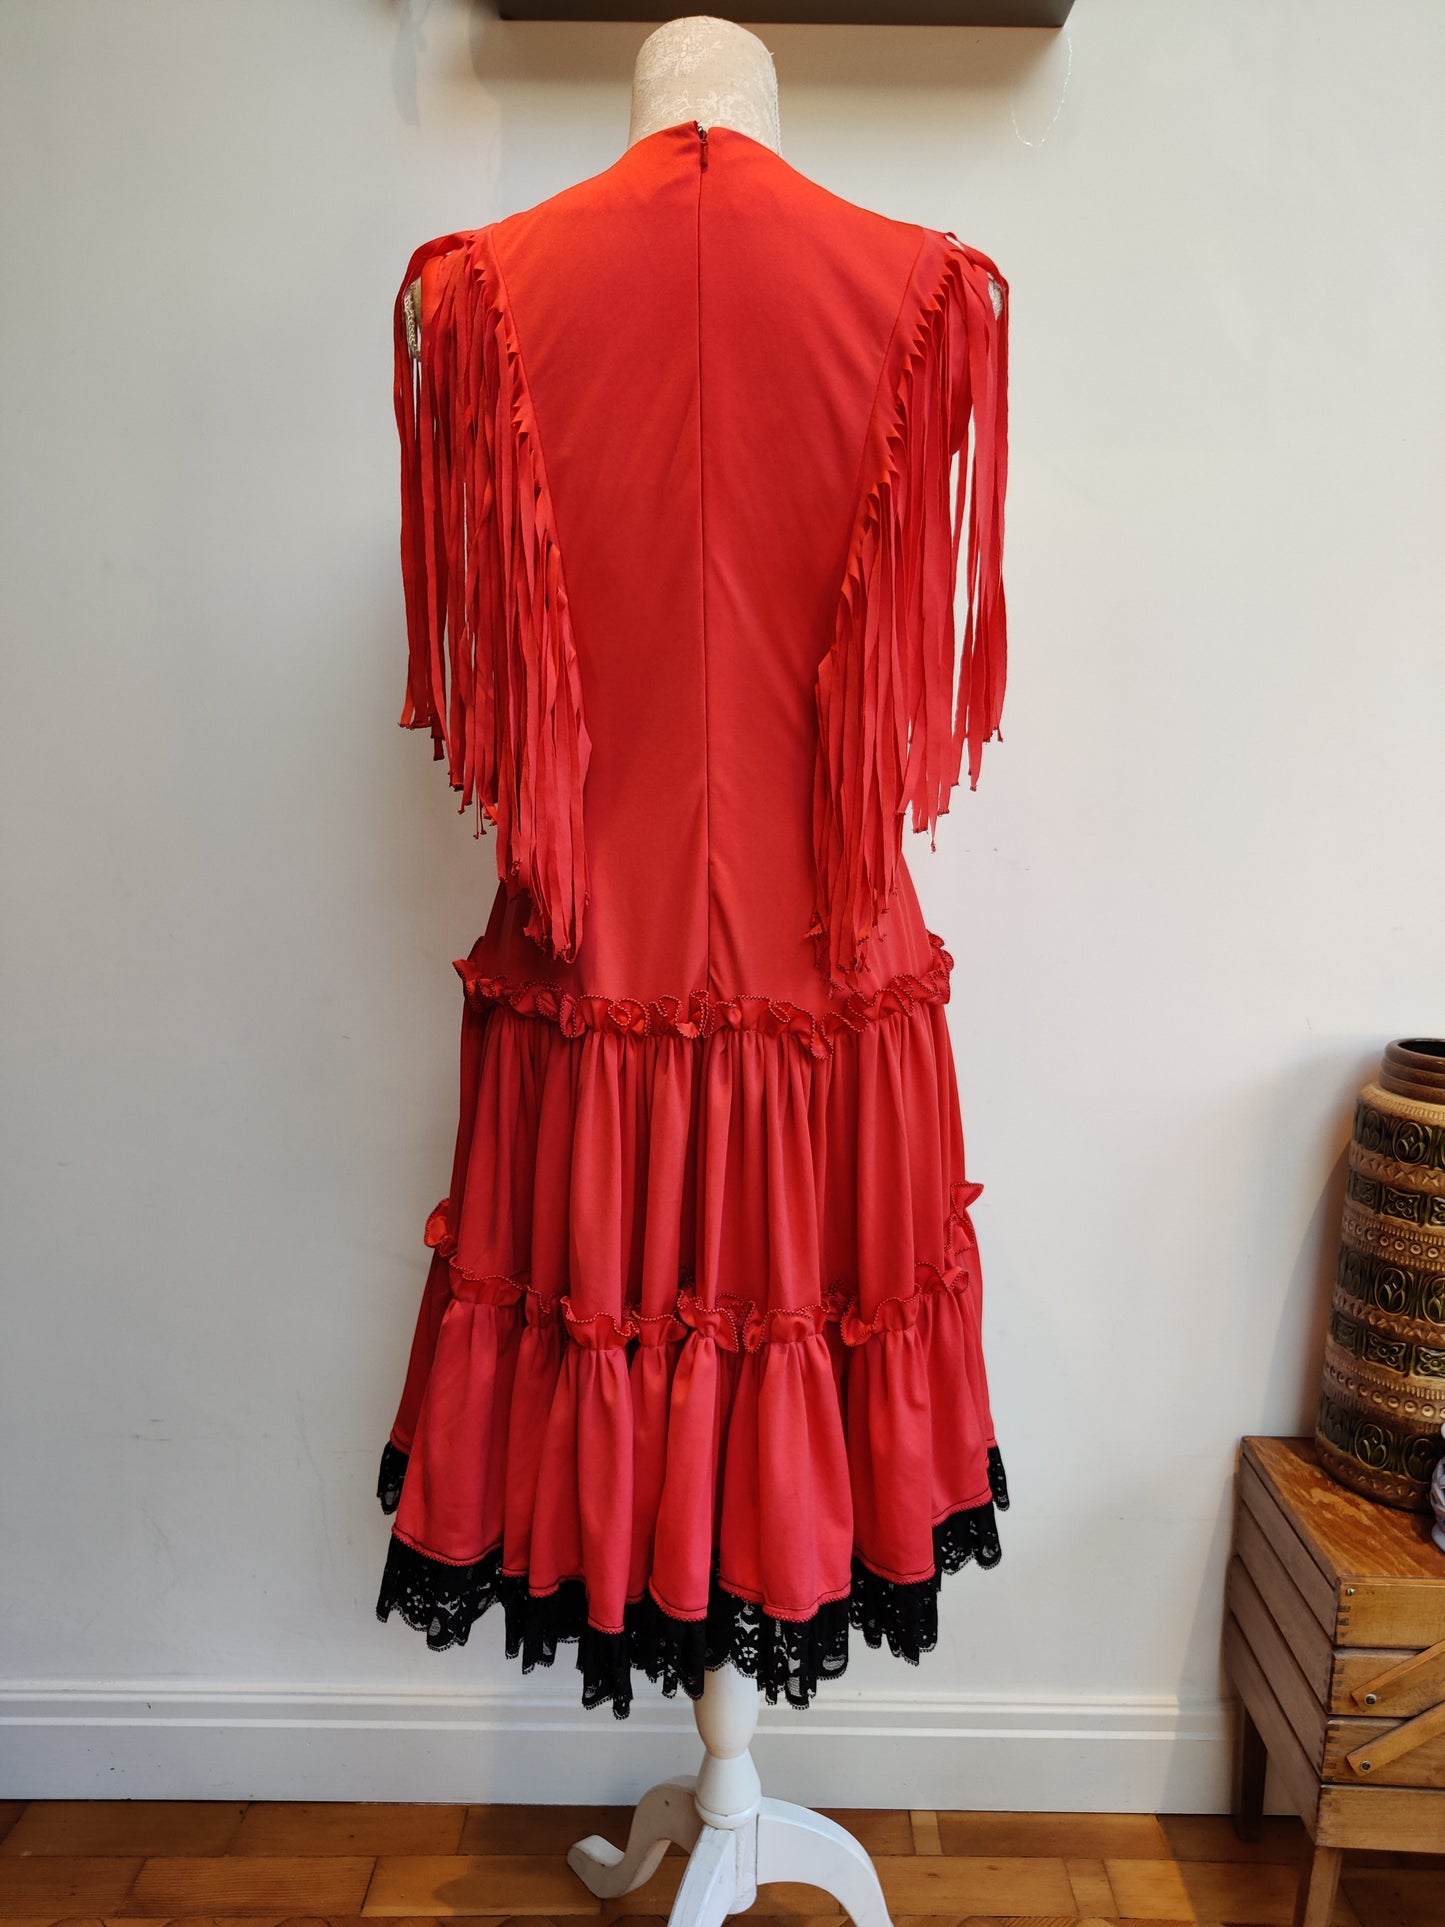 Red vintage dress with full skirt and tassels